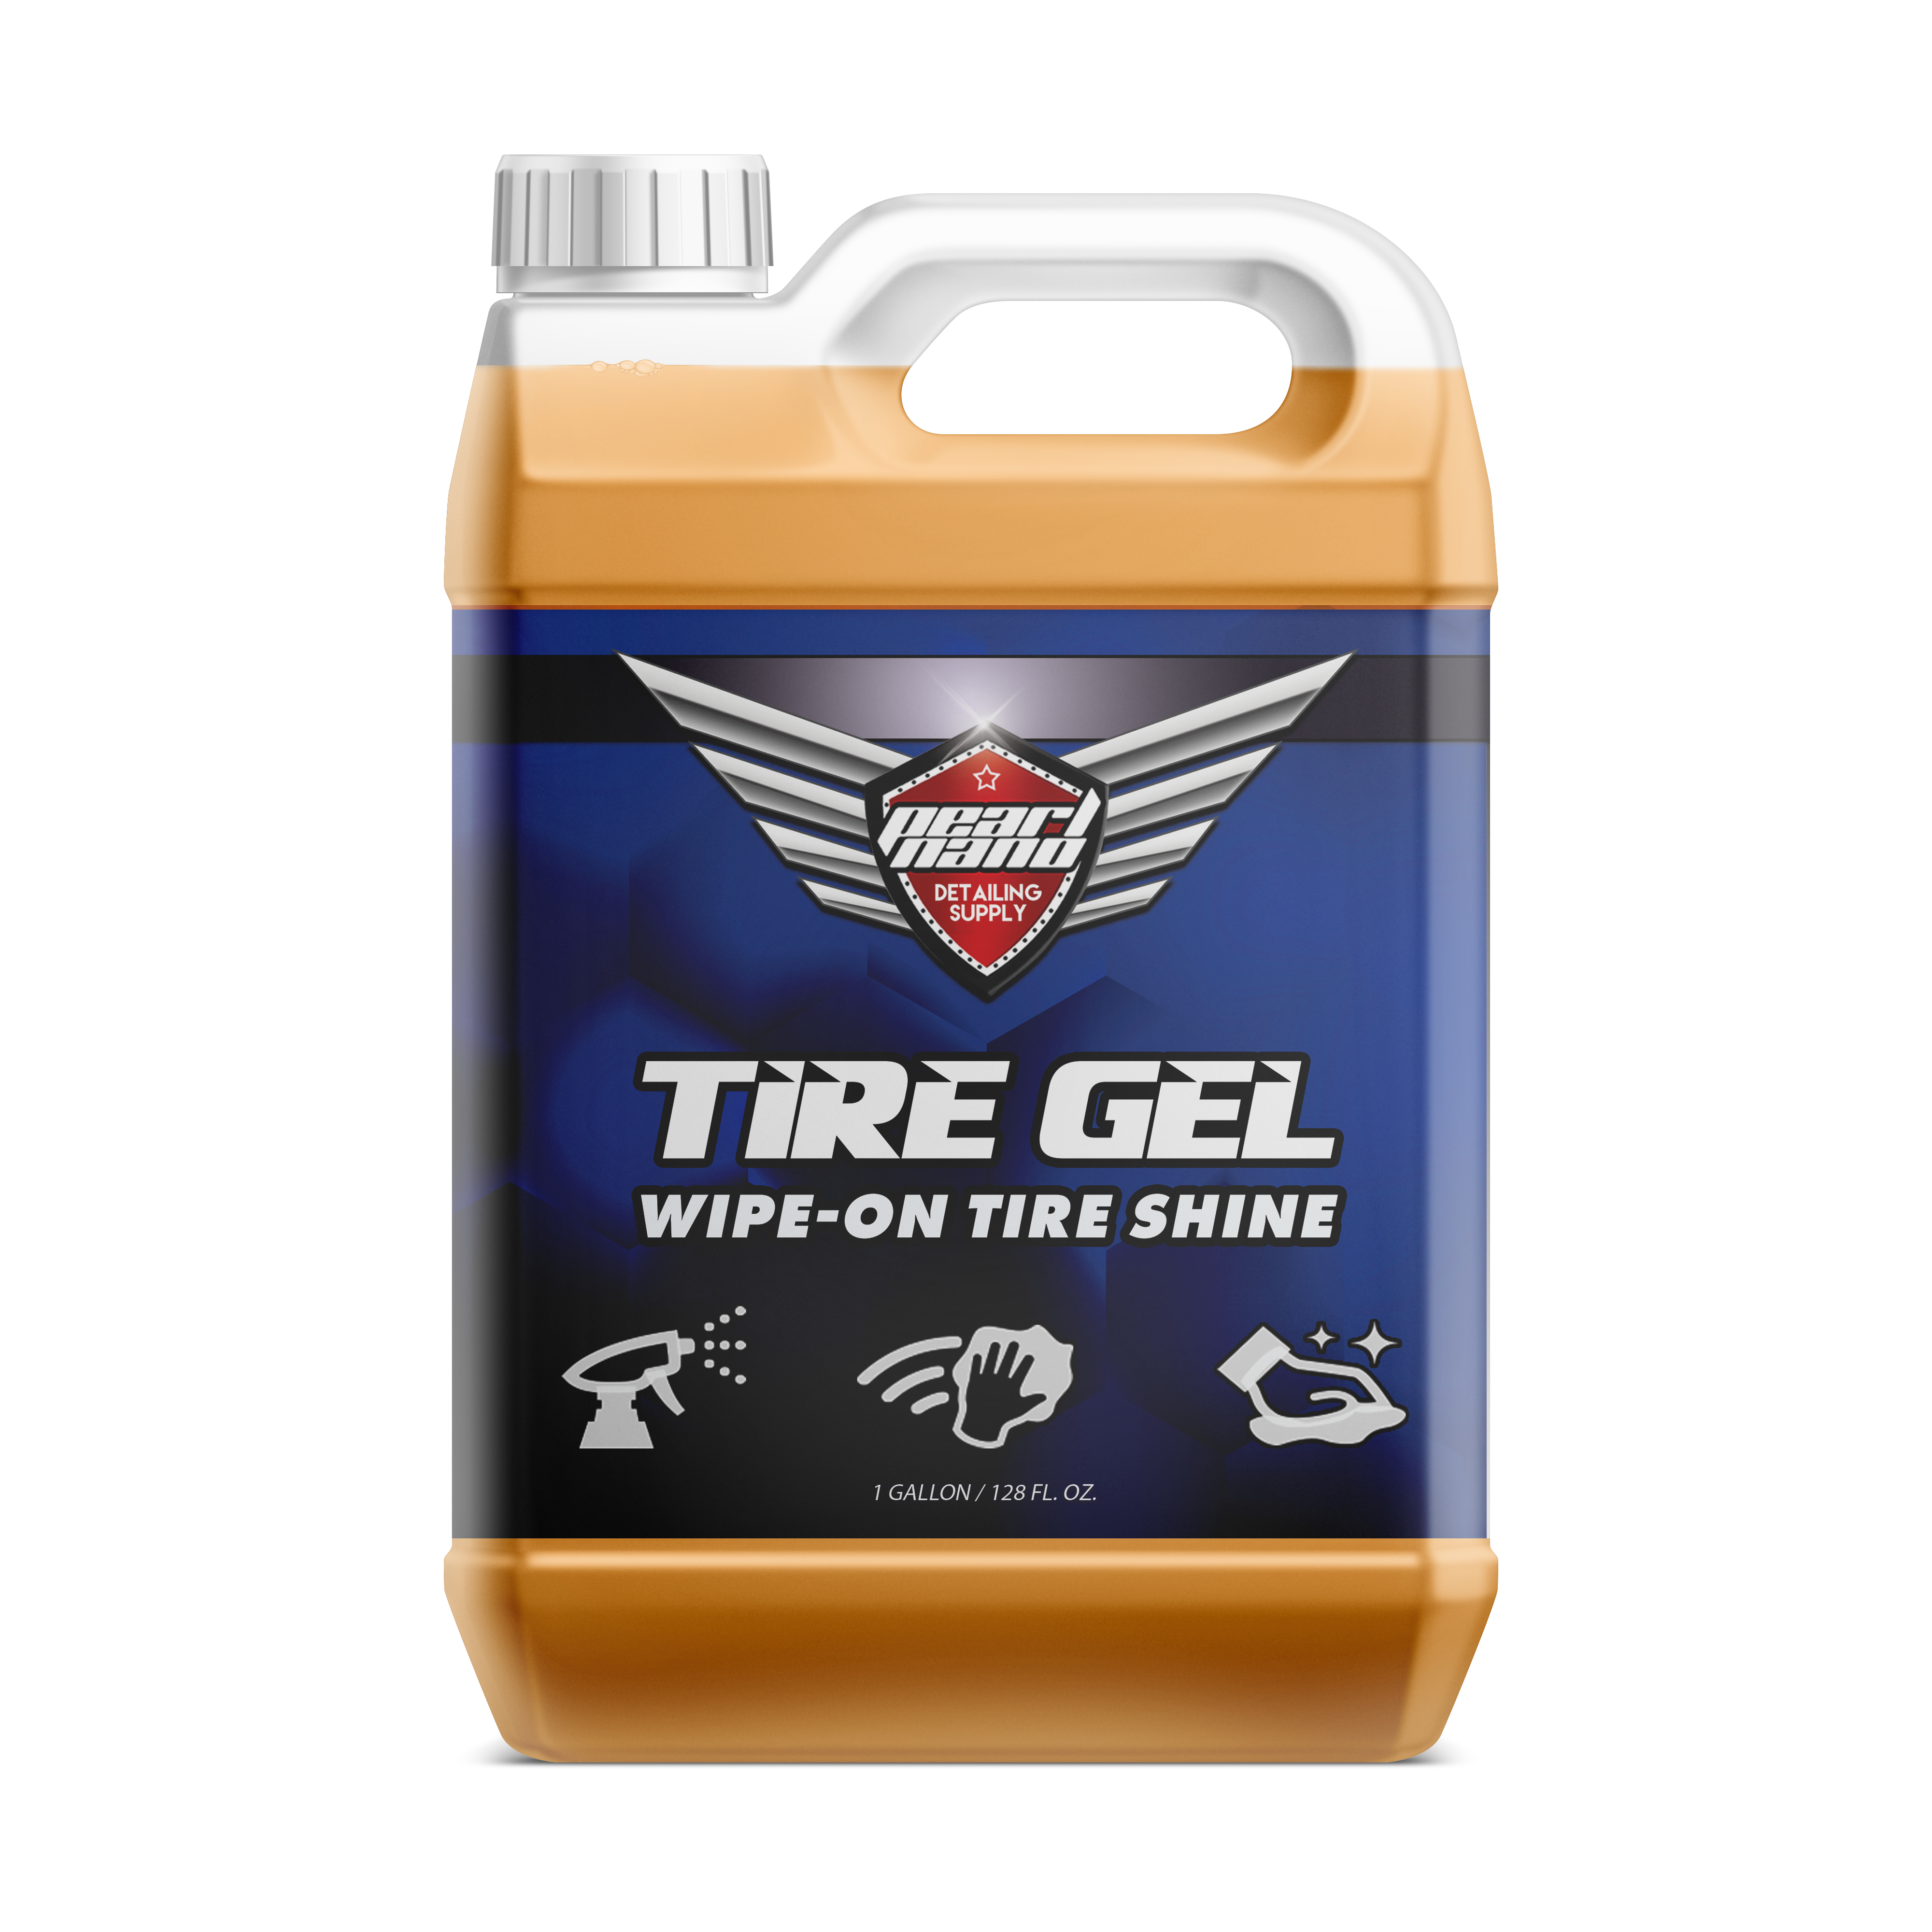 Tire Gel review💎💎 Not too bad👍 #cardetailing #detailing #detailing